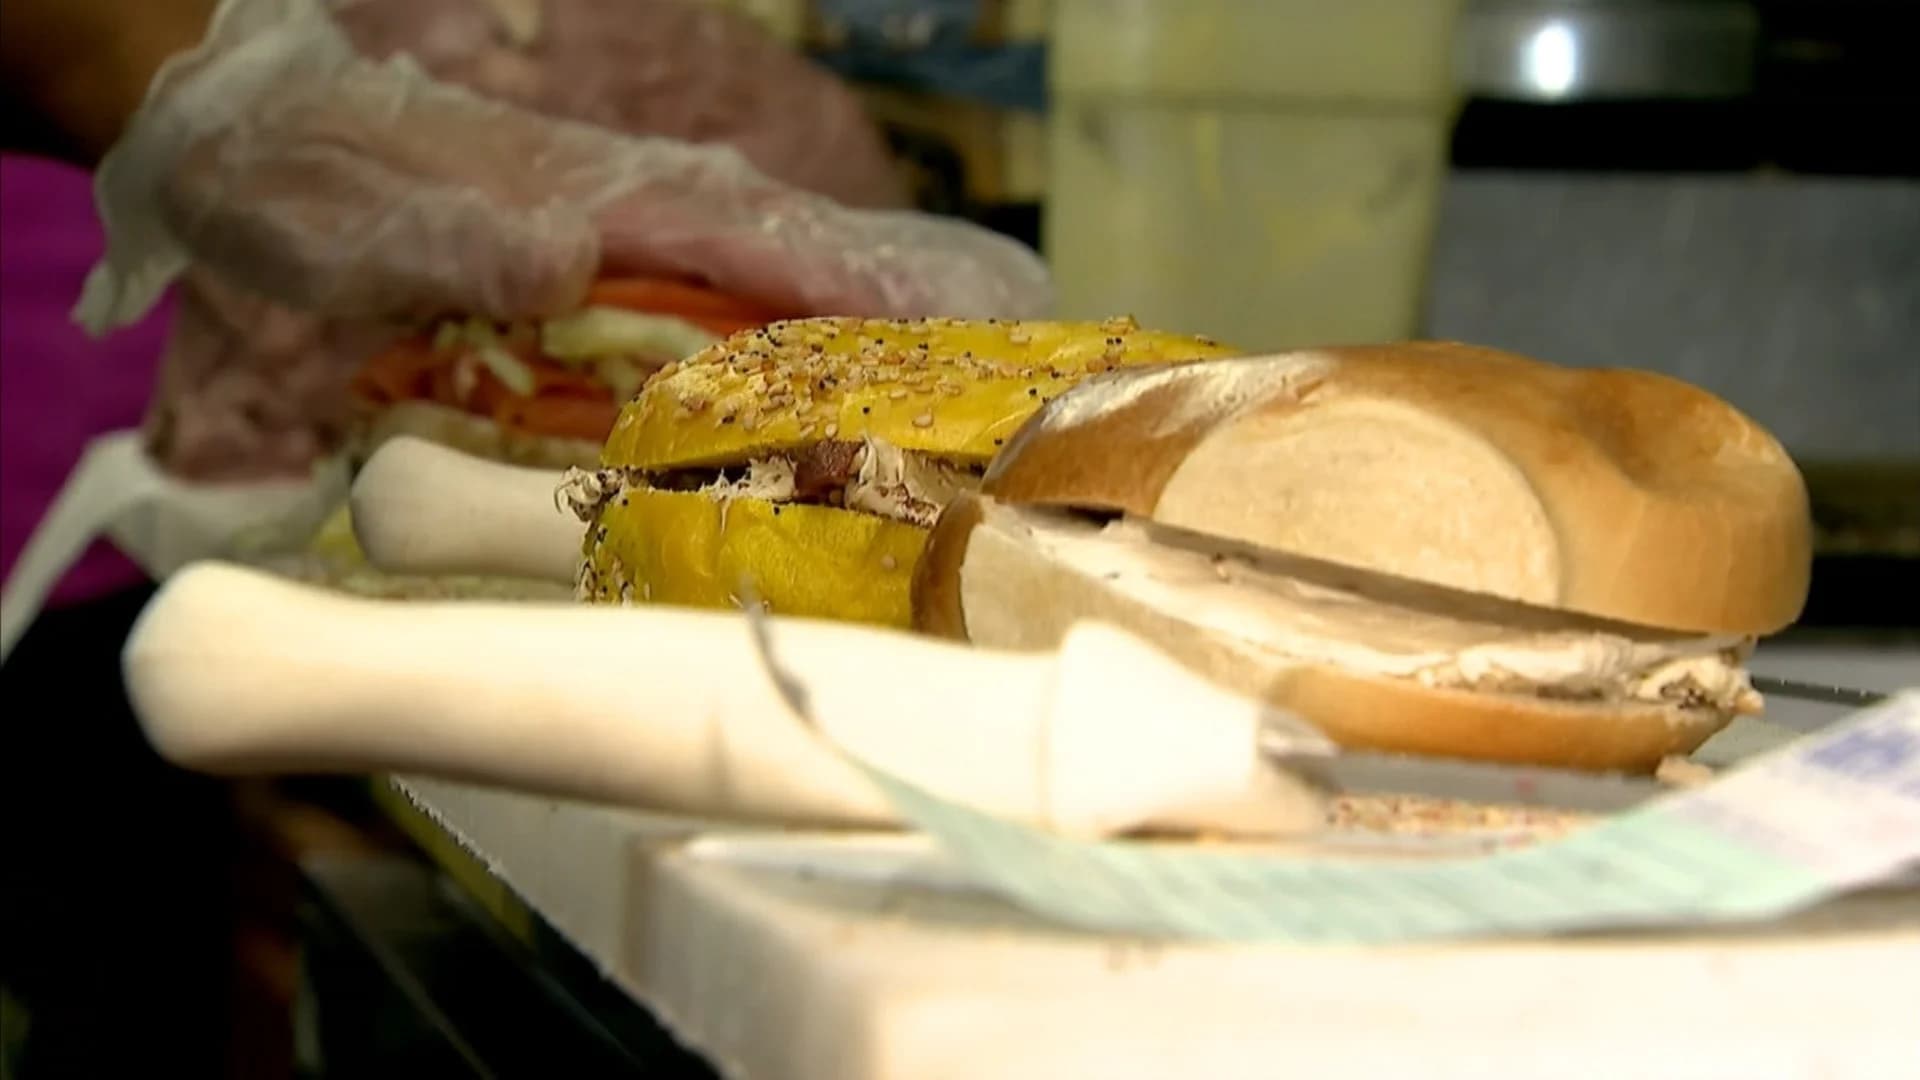 New Jersey declares itself ‘Bagel Capital of the World’ – Do you agree?